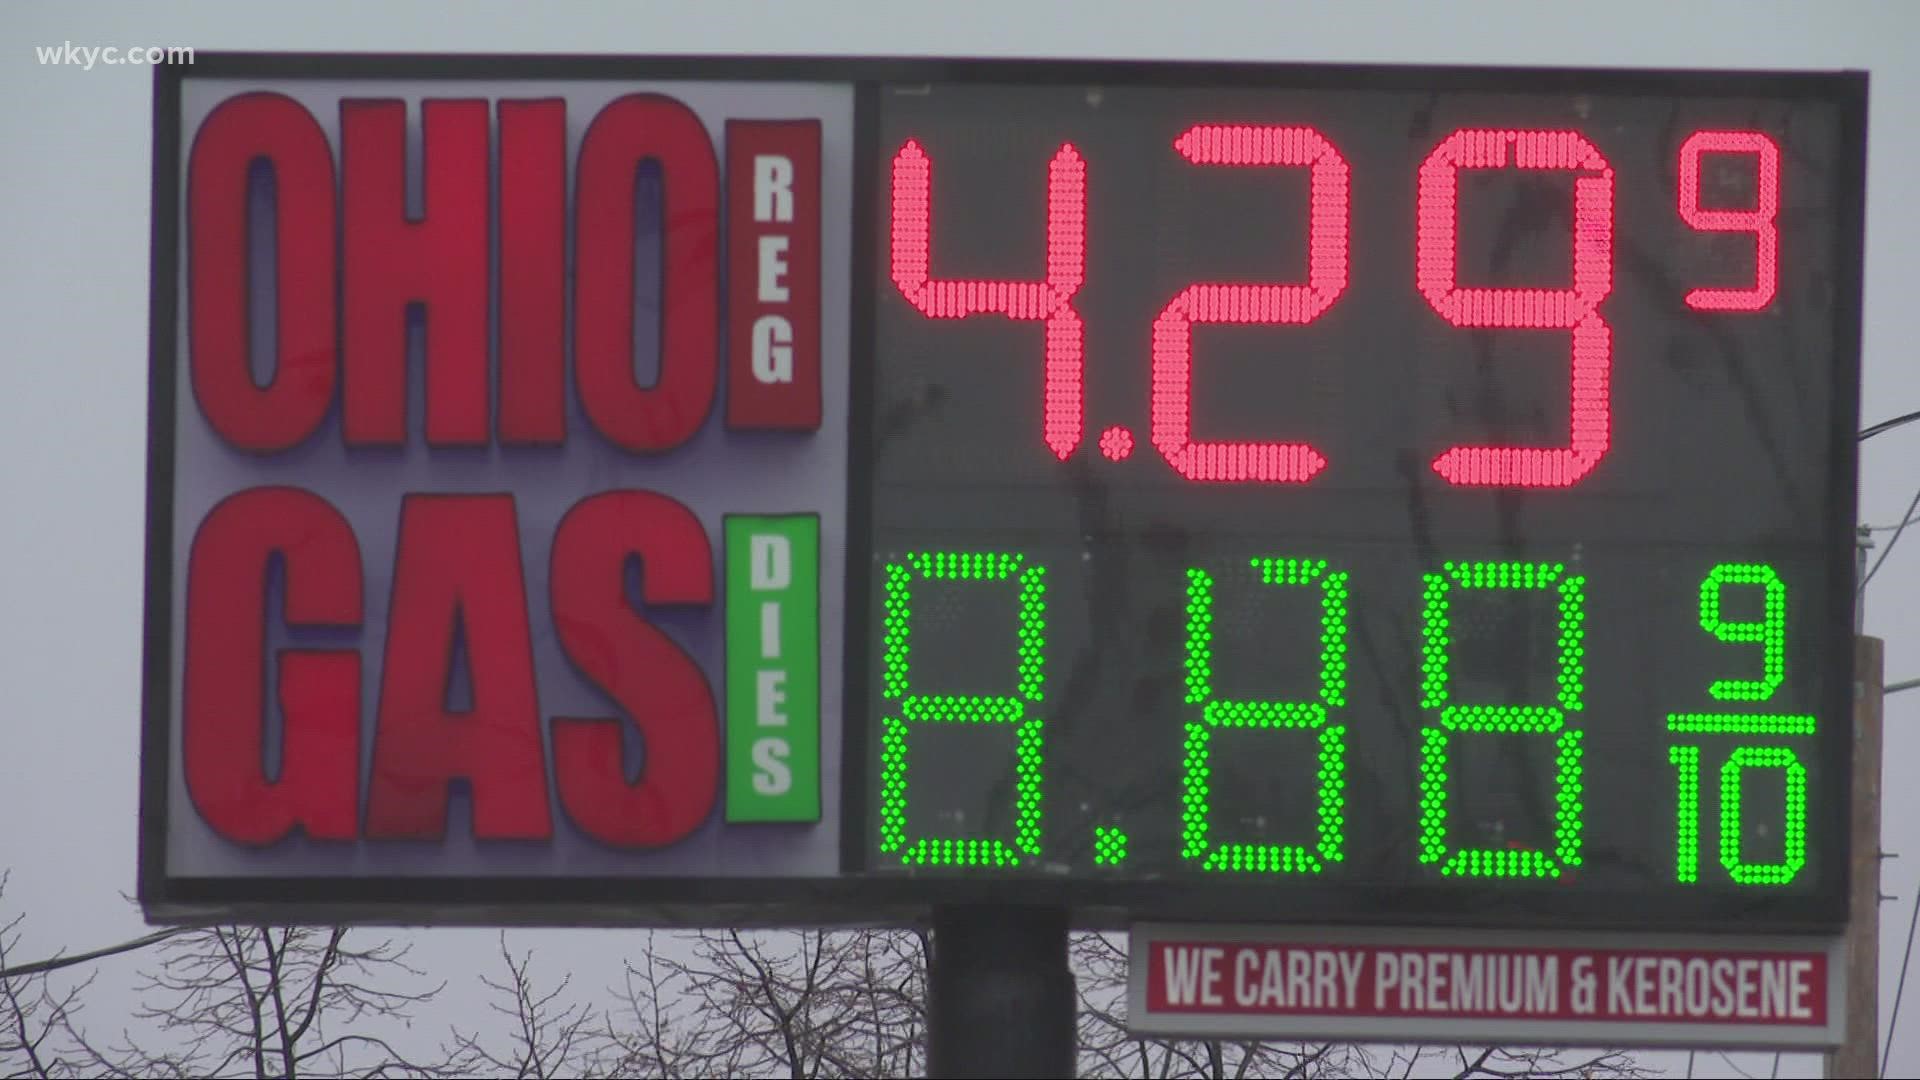 The price of regular broke $4 a gallon on Sunday for the first time in nearly 14 years and is now up nearly 50% from a year ago.